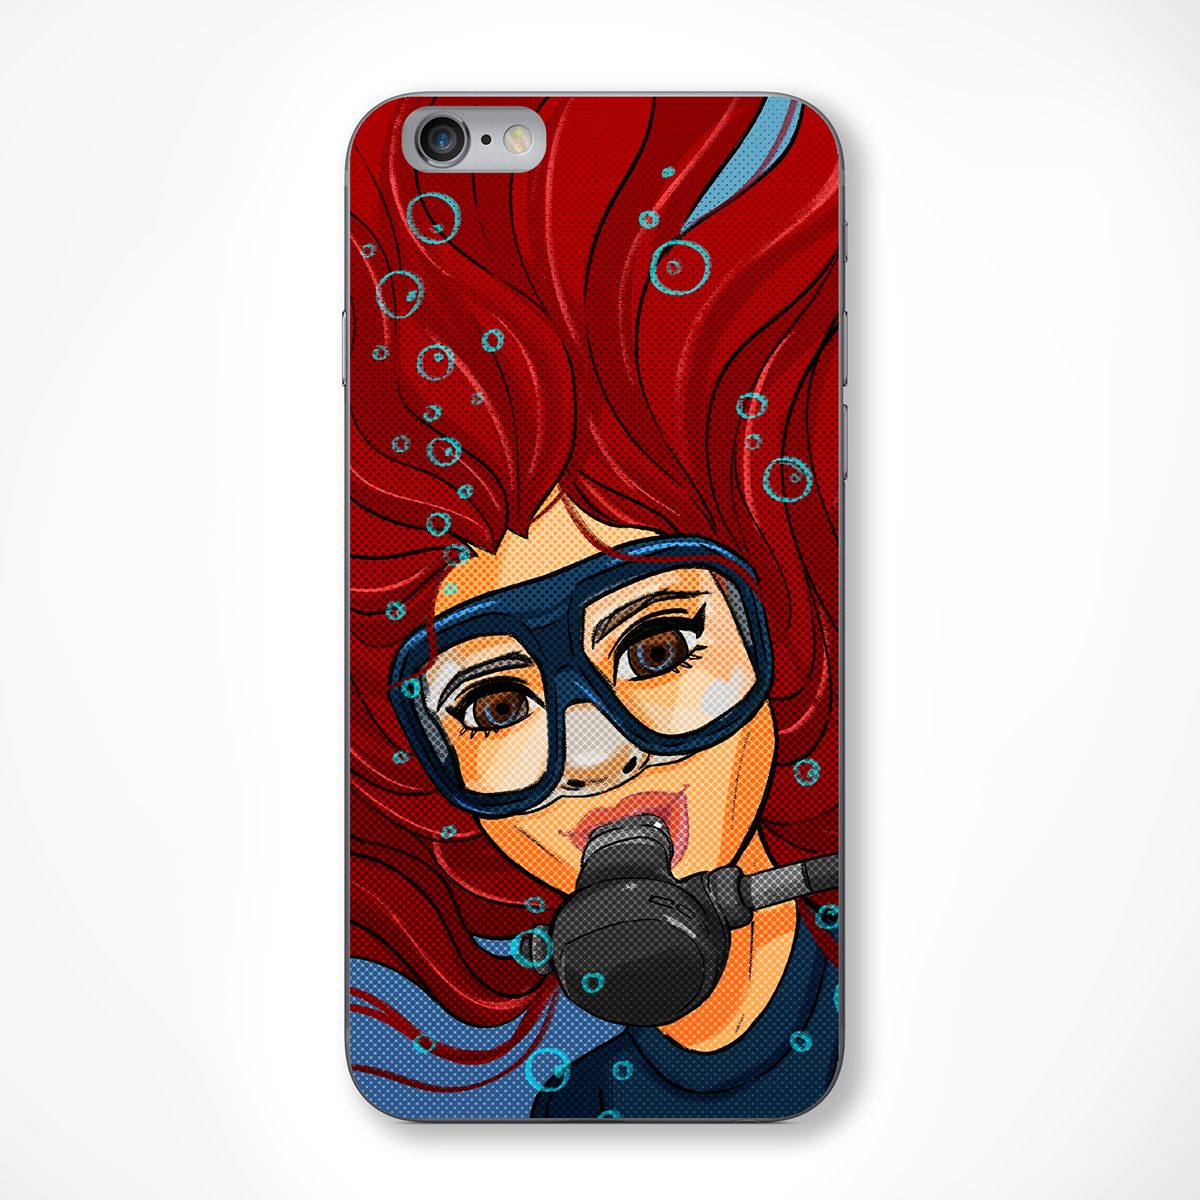 phone phonecase Character design  Personalized product Porträt ILLUSTRATION  Digital Art  Fashion  surface design